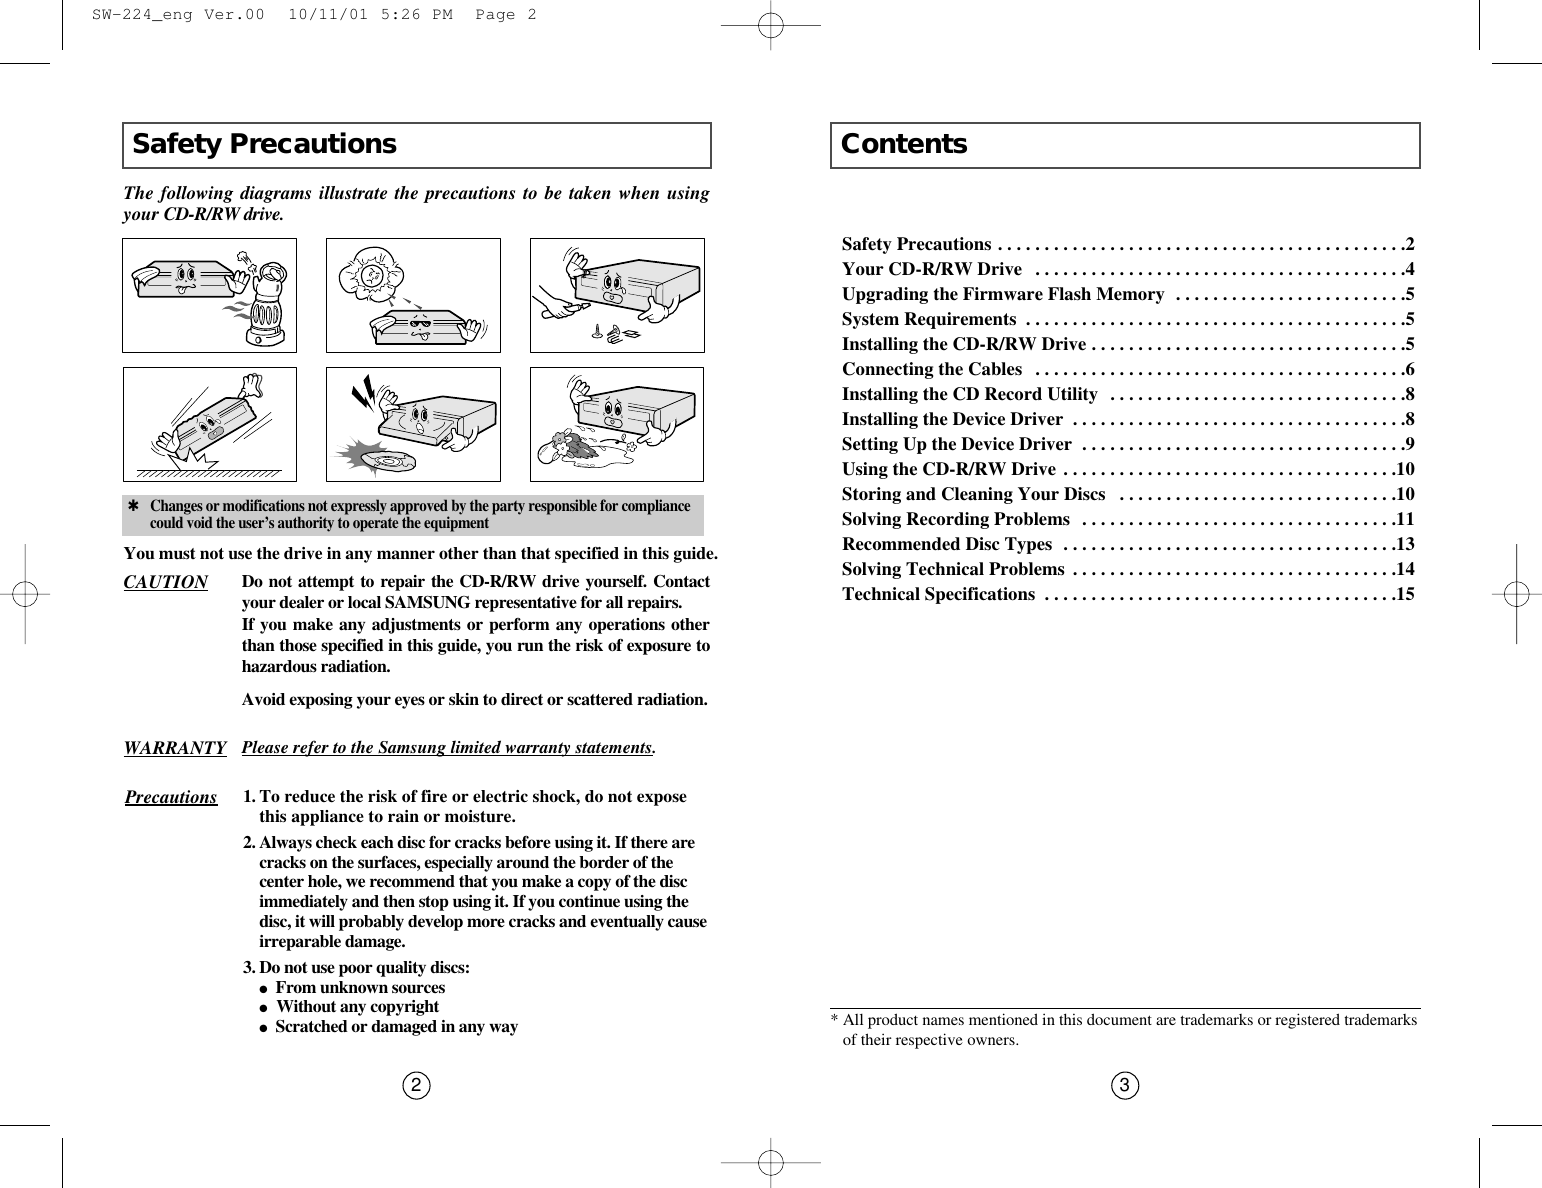 Contents3Safety Precautions2The following diagrams illustrate the precautions to be taken when usingyour CD-R/RW drive. You must not use the drive in any manner other than that specified in this guide.✱Changes or modifications not expressly approved by the party responsible for compliancecould void the user’s authority to operate the equipmentAvoid exposing your eyes or skin to direct or scattered radiation.CAUTION Do not attempt to repair the CD-R/RW drive yourself. Contactyour dealer or local SAMSUNG representative for all repairs.If you make any adjustments or perform any operations otherthan those specified in this guide, you run the risk of exposure tohazardous radiation.WARRANTY Please refer to the Samsung limited warranty statements.Precautions 1.To reduce the risk of fire or electric shock, do not exposethis appliance to rain or moisture.2. Always check each disc for cracks before using it. If there arecracks on the surfaces, especially around the border of thecenter hole, we recommend that you make a copy of the discimmediately and then stop using it. If you continue using thedisc, it will probably develop more cracks and eventually causeirreparable damage.3. Do not use poor quality discs:●From unknown sources●  Without any copyright●Scratched or damaged in any waySafety Precautions . . . . . . . . . . . . . . . . . . . . . . . . . . . . . . . . . . . . . . . . . . . .2Your CD-R/RW Drive  . . . . . . . . . . . . . . . . . . . . . . . . . . . . . . . . . . . . . . . .4Upgrading the Firmware Flash Memory  . . . . . . . . . . . . . . . . . . . . . . . . .5System Requirements  . . . . . . . . . . . . . . . . . . . . . . . . . . . . . . . . . . . . . . . . .5Installing the CD-R/RW Drive . . . . . . . . . . . . . . . . . . . . . . . . . . . . . . . . . .5Connecting the Cables  . . . . . . . . . . . . . . . . . . . . . . . . . . . . . . . . . . . . . . . .6Installing the CD Record Utility  . . . . . . . . . . . . . . . . . . . . . . . . . . . . . . . .8Installing the Device Driver  . . . . . . . . . . . . . . . . . . . . . . . . . . . . . . . . . . . .8Setting Up the Device Driver  . . . . . . . . . . . . . . . . . . . . . . . . . . . . . . . . . . .9Using the CD-R/RW Drive . . . . . . . . . . . . . . . . . . . . . . . . . . . . . . . . . . . .10Storing and Cleaning Your Discs  . . . . . . . . . . . . . . . . . . . . . . . . . . . . . .10Solving Recording Problems  . . . . . . . . . . . . . . . . . . . . . . . . . . . . . . . . . .11Recommended Disc Types  . . . . . . . . . . . . . . . . . . . . . . . . . . . . . . . . . . . .13Solving Technical Problems  . . . . . . . . . . . . . . . . . . . . . . . . . . . . . . . . . . .14Technical Specifications  . . . . . . . . . . . . . . . . . . . . . . . . . . . . . . . . . . . . . .15* All product names mentioned in this document are trademarks or registered trademarksof their respective owners.  SW-224_eng Ver.00  10/11/01 5:26 PM  Page 2